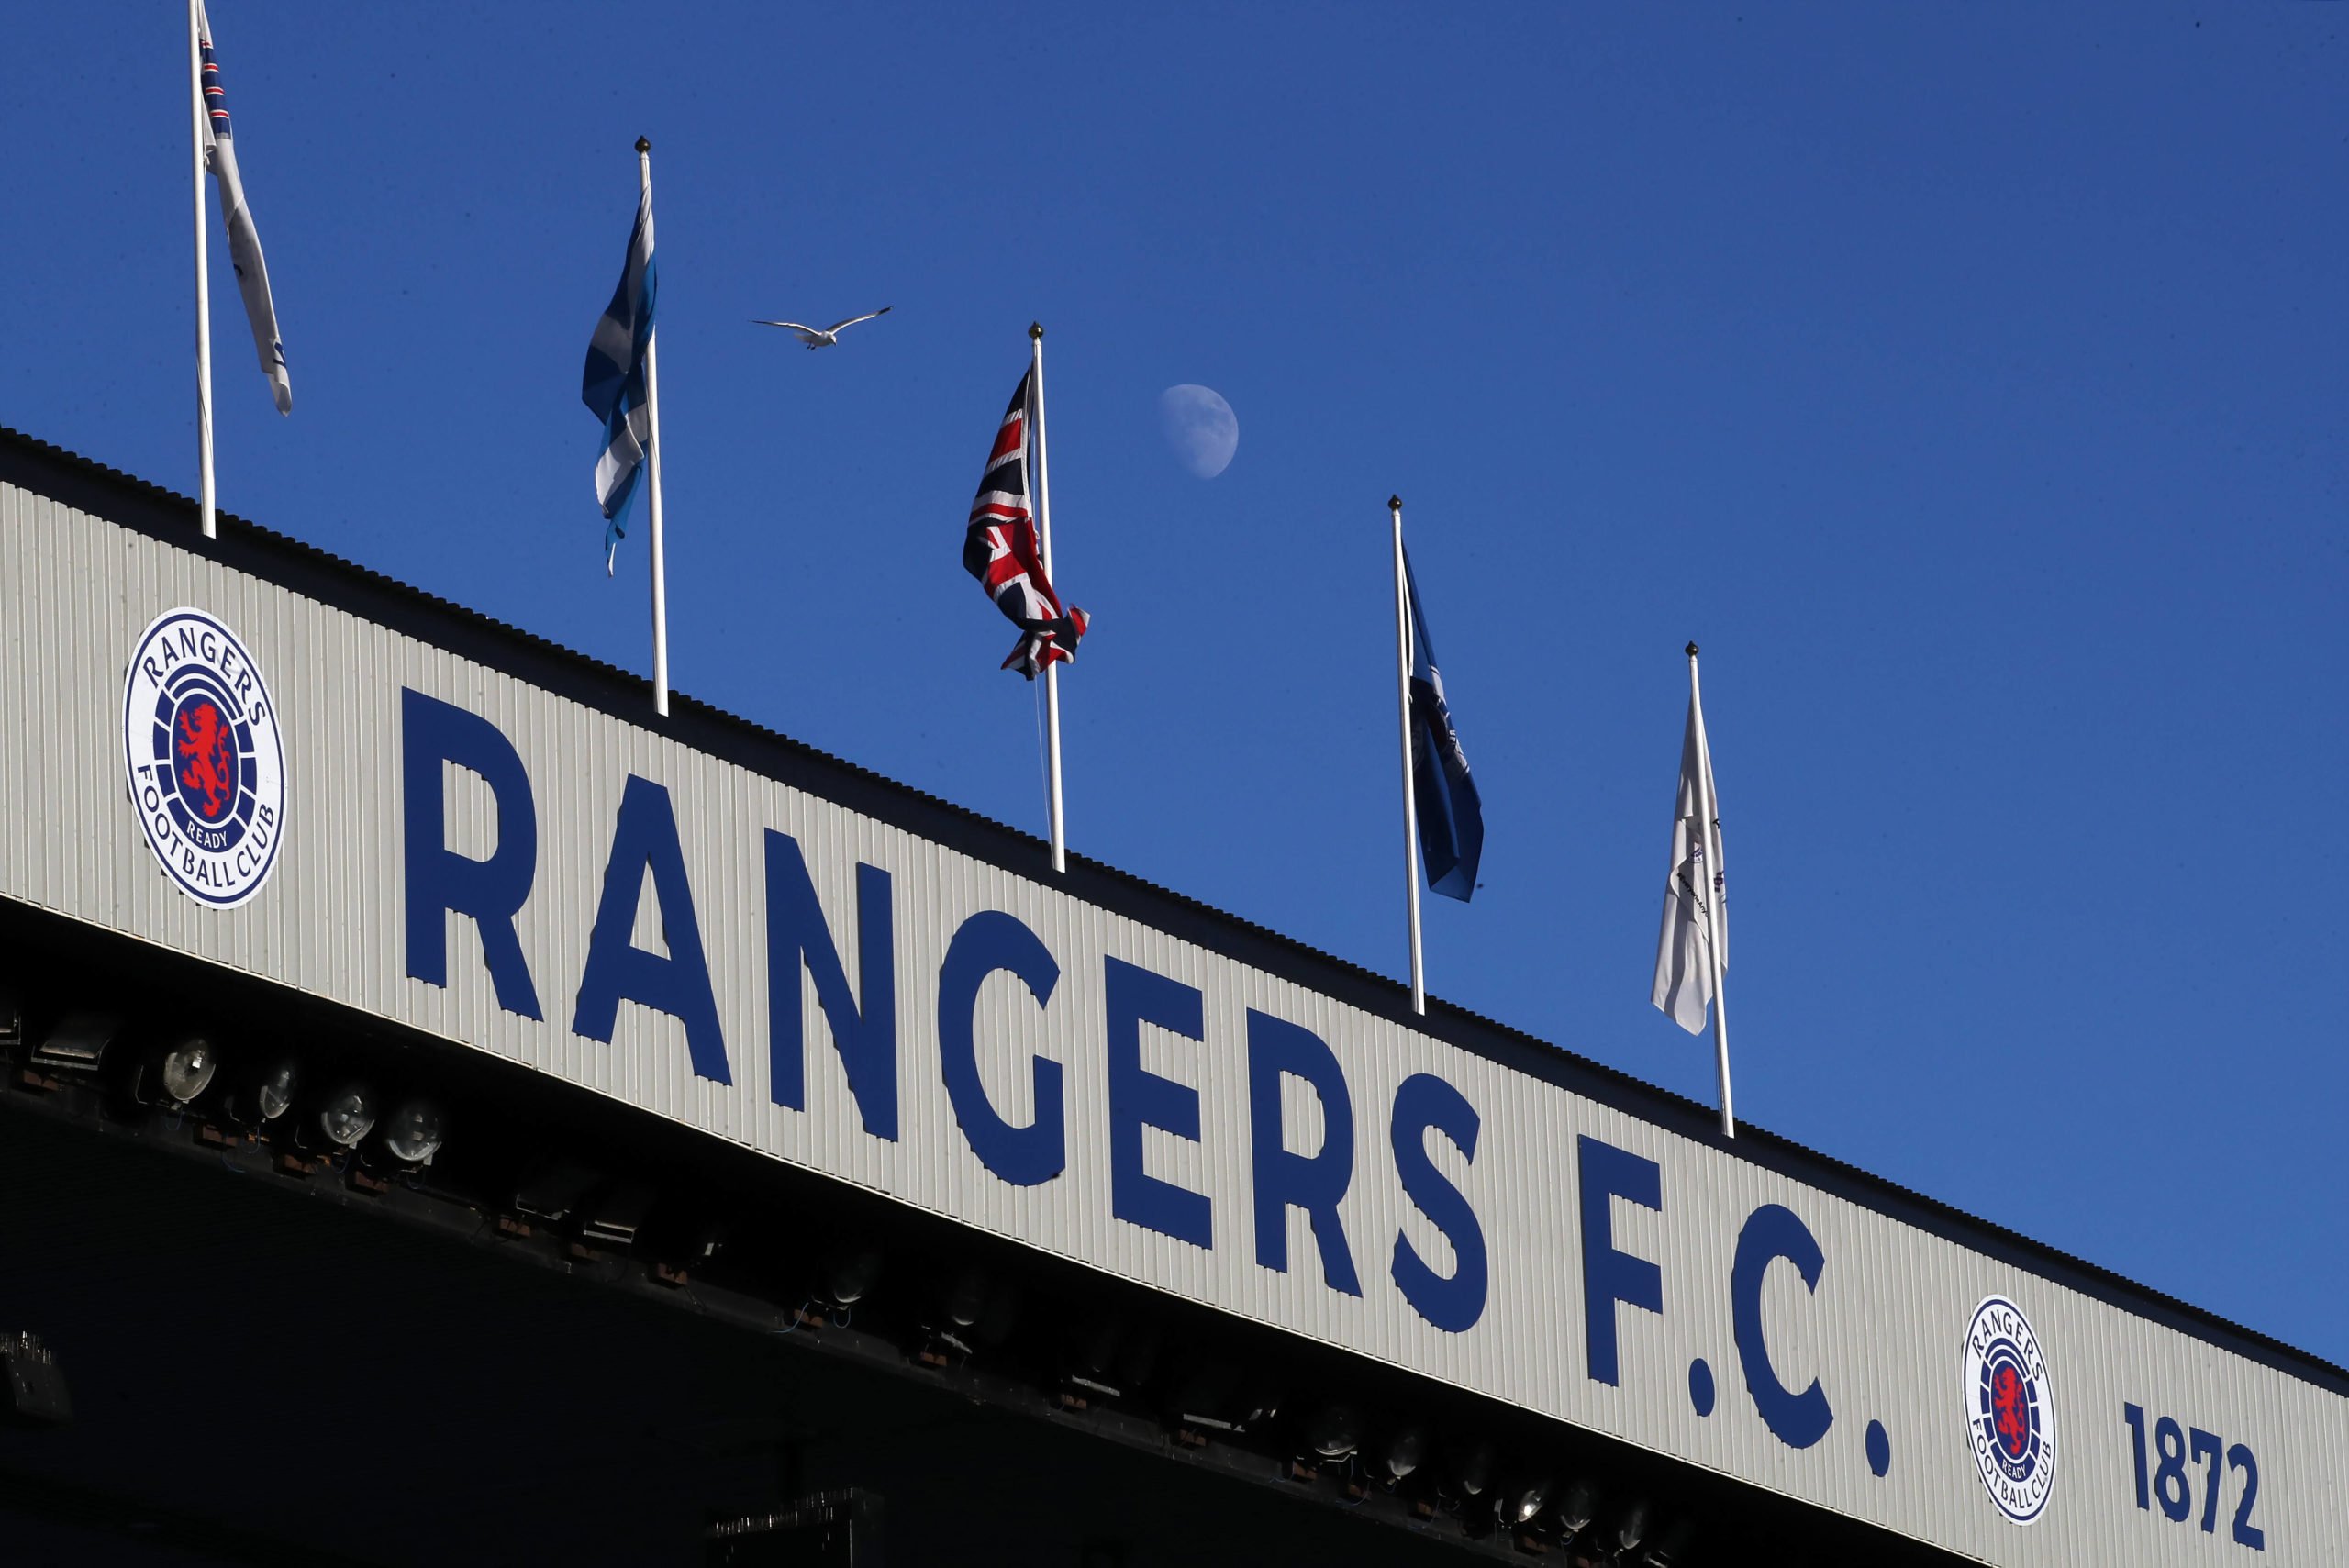 Flag Day at Rangers